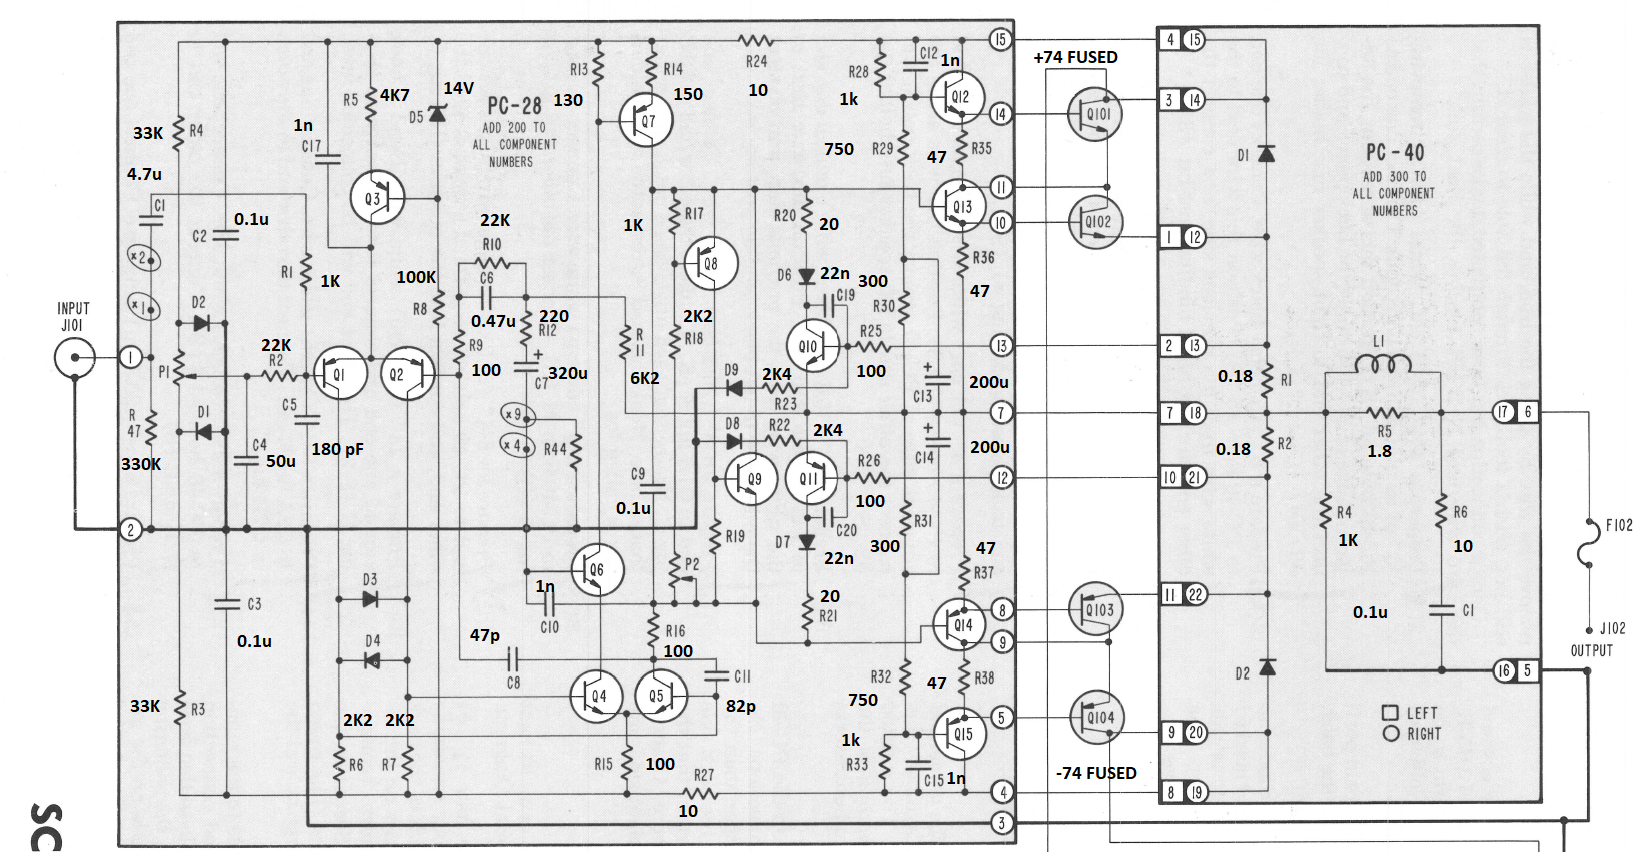 Stereo 410 schematic with annotated values